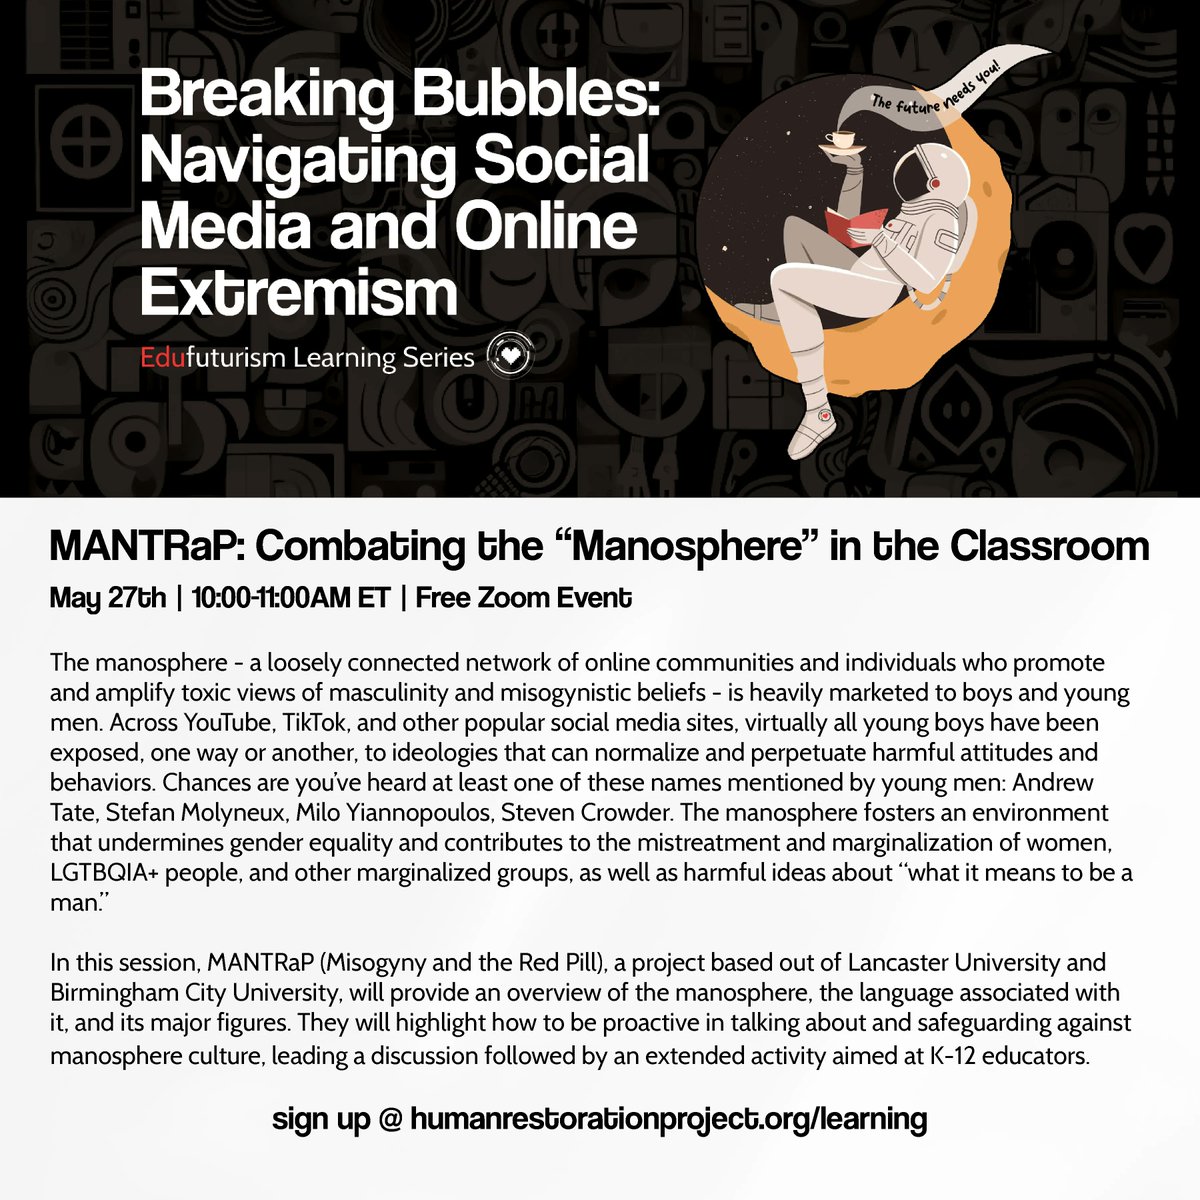 We've gotten a lot of interest on this free event! Here's your reminder to join us & @_MANTRaP_ on Sat, 5/27 @ 10am ET as we unpack the impact of the 'manosphere' & toxic masculinity in schools:

humanrestorationproject.org/learning #satchat #edchat #restorehumanity #K12 #education